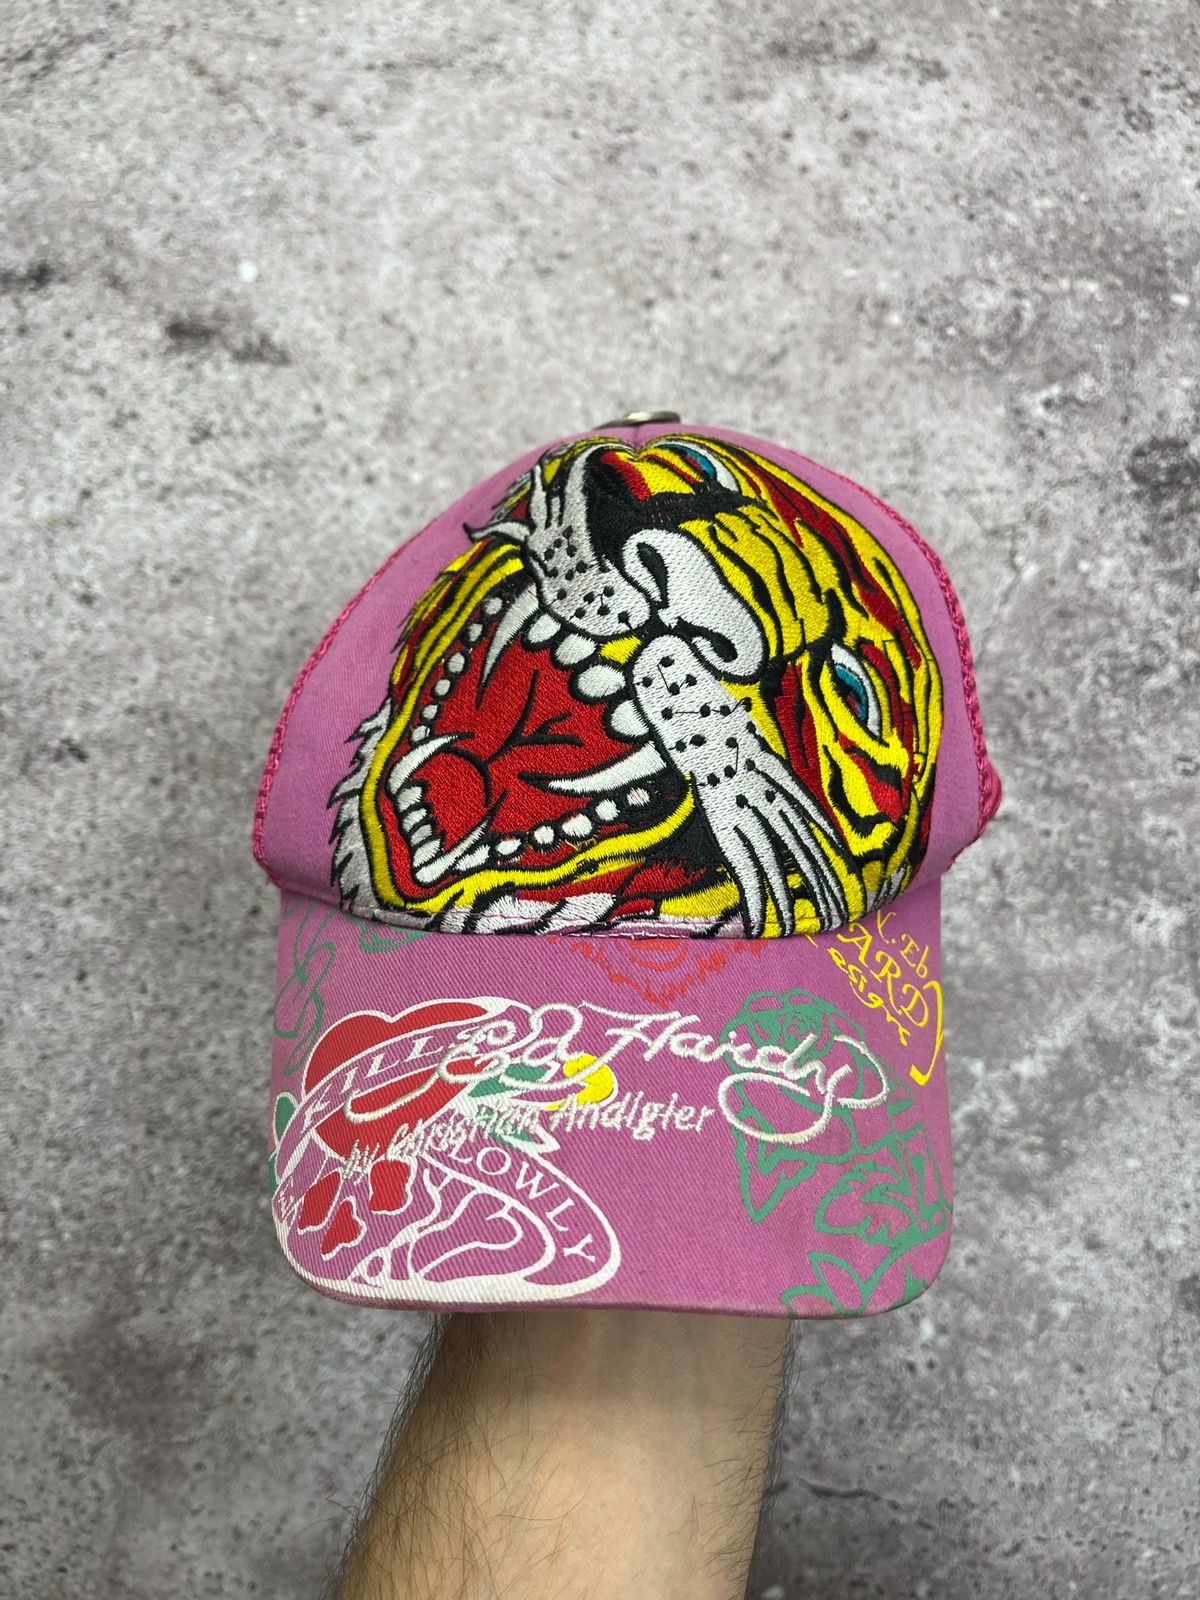 Pre-owned Christian Audigier X Ed Hardy By Christian Audigier Vintage Cap In Pink